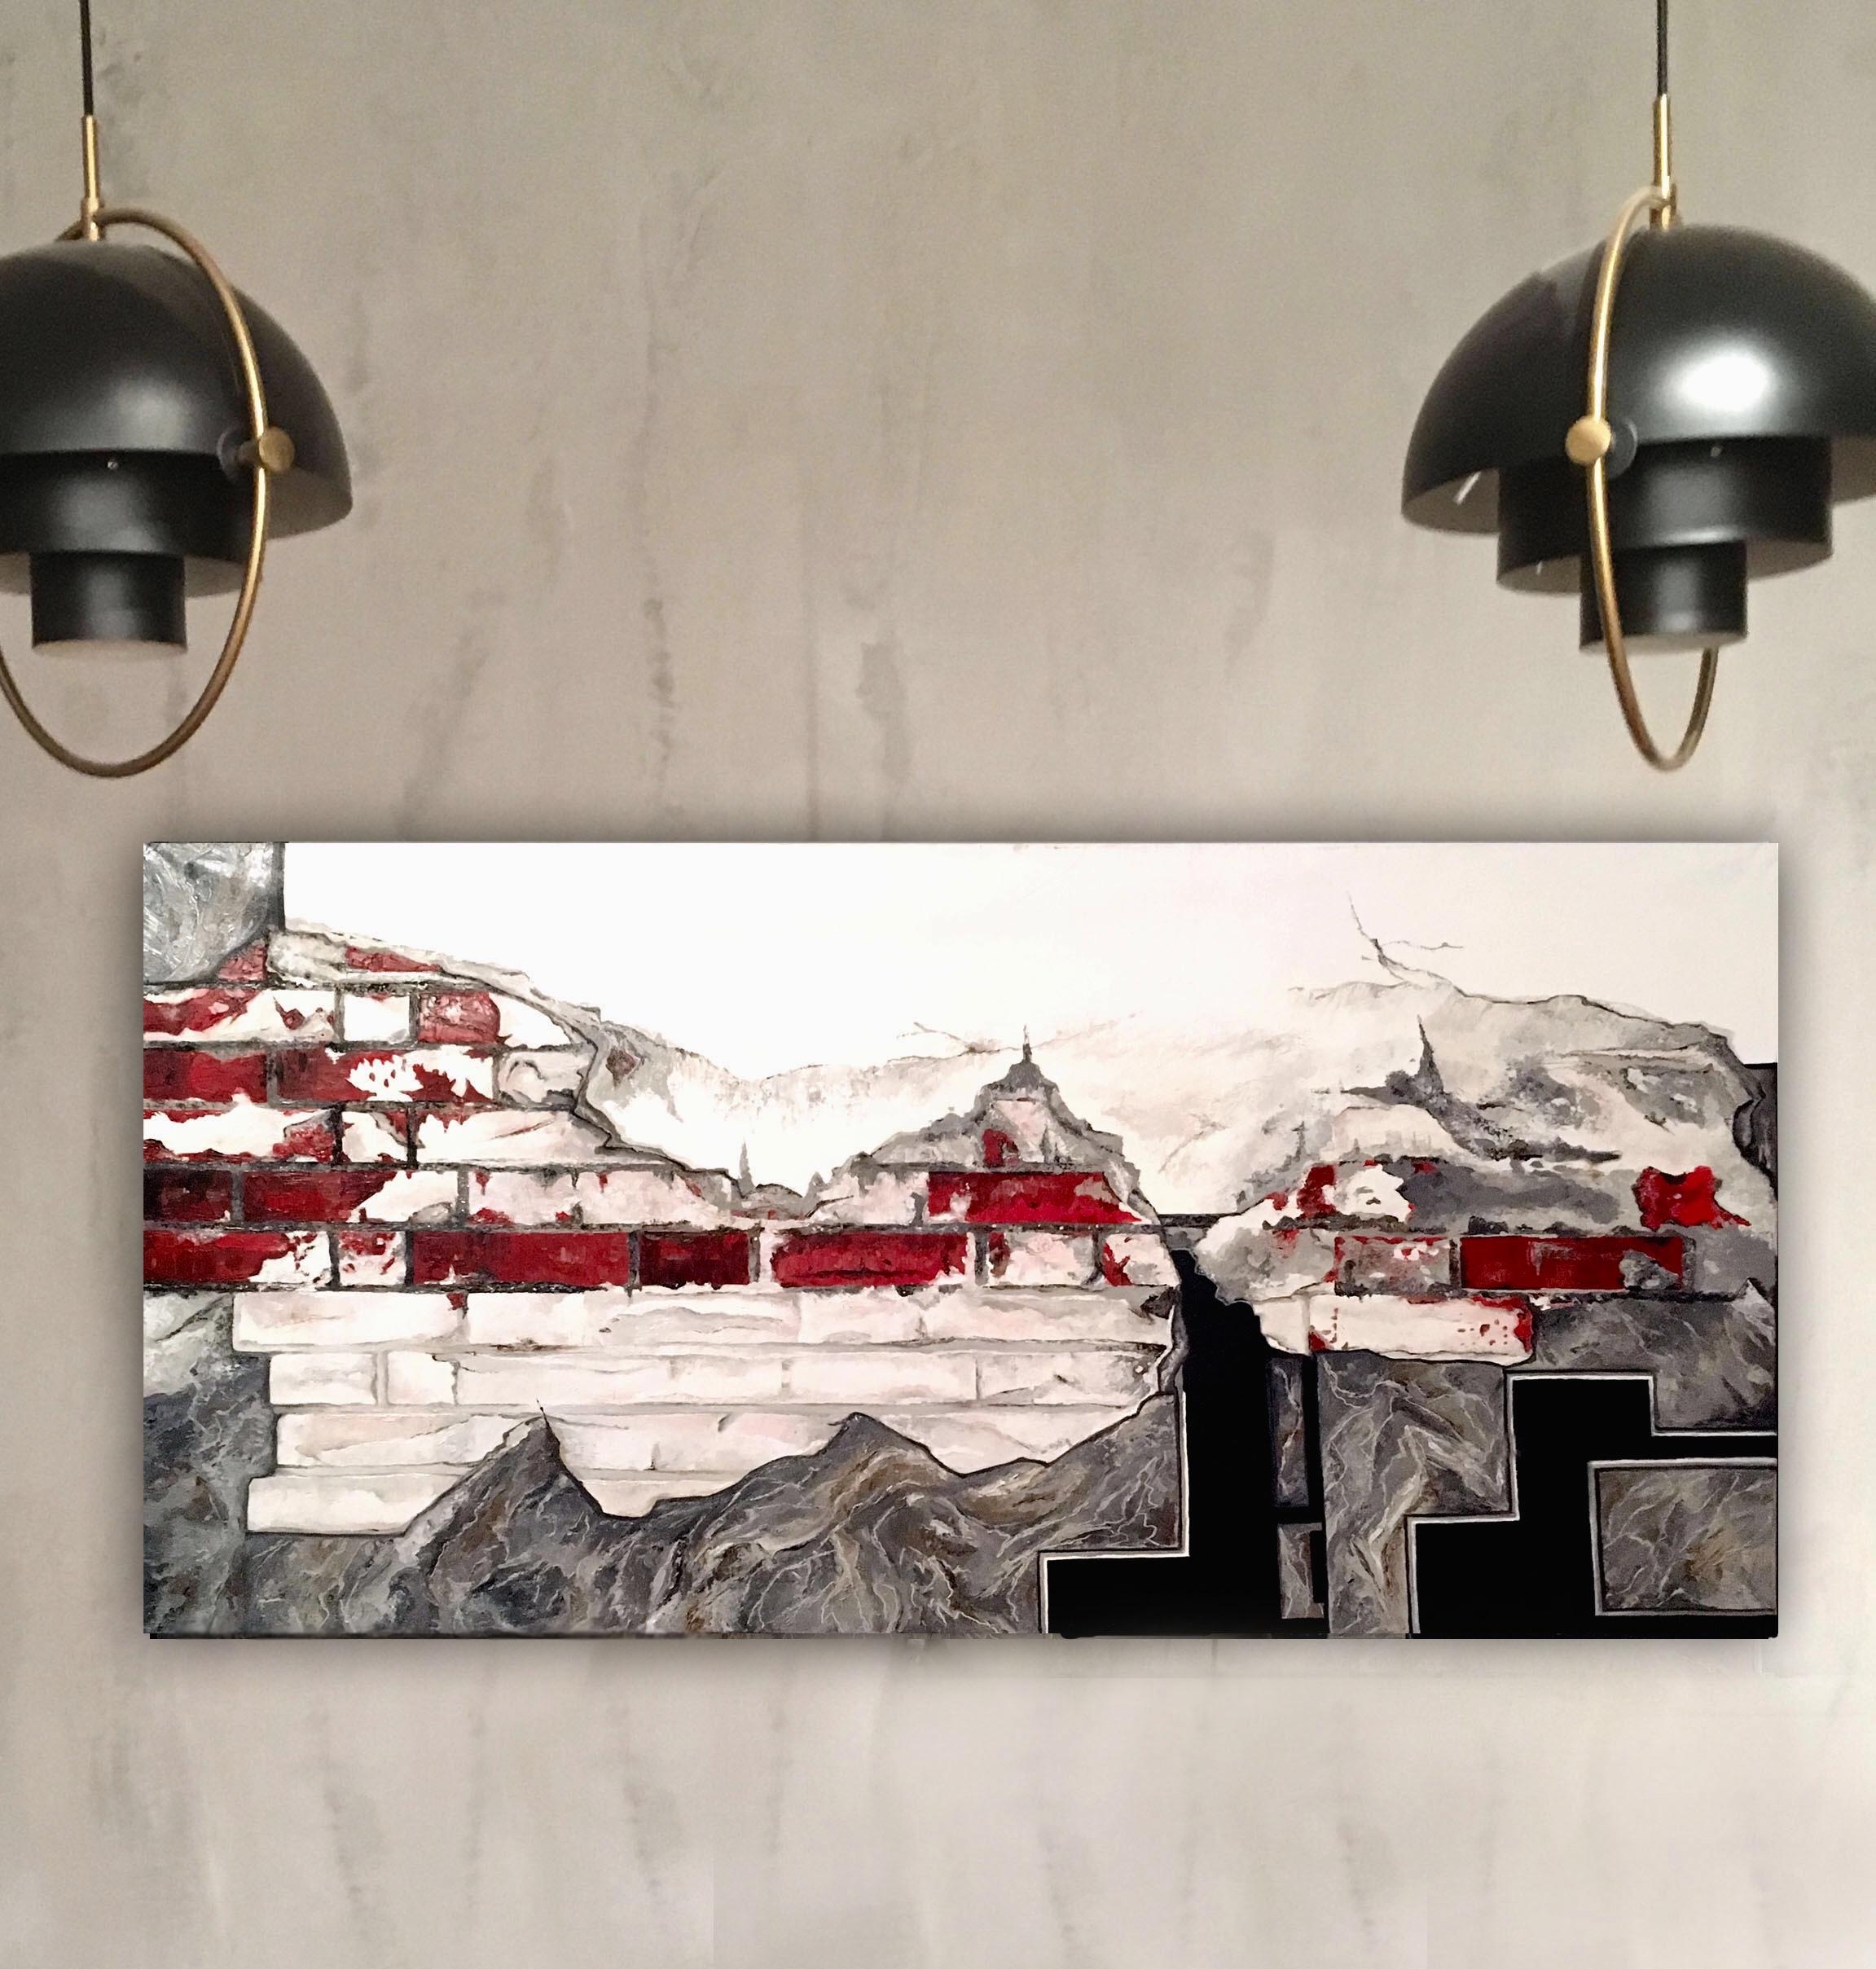 City of Angels (brick wall)-abstract painting made in red, black and white color - Painting by Galin R